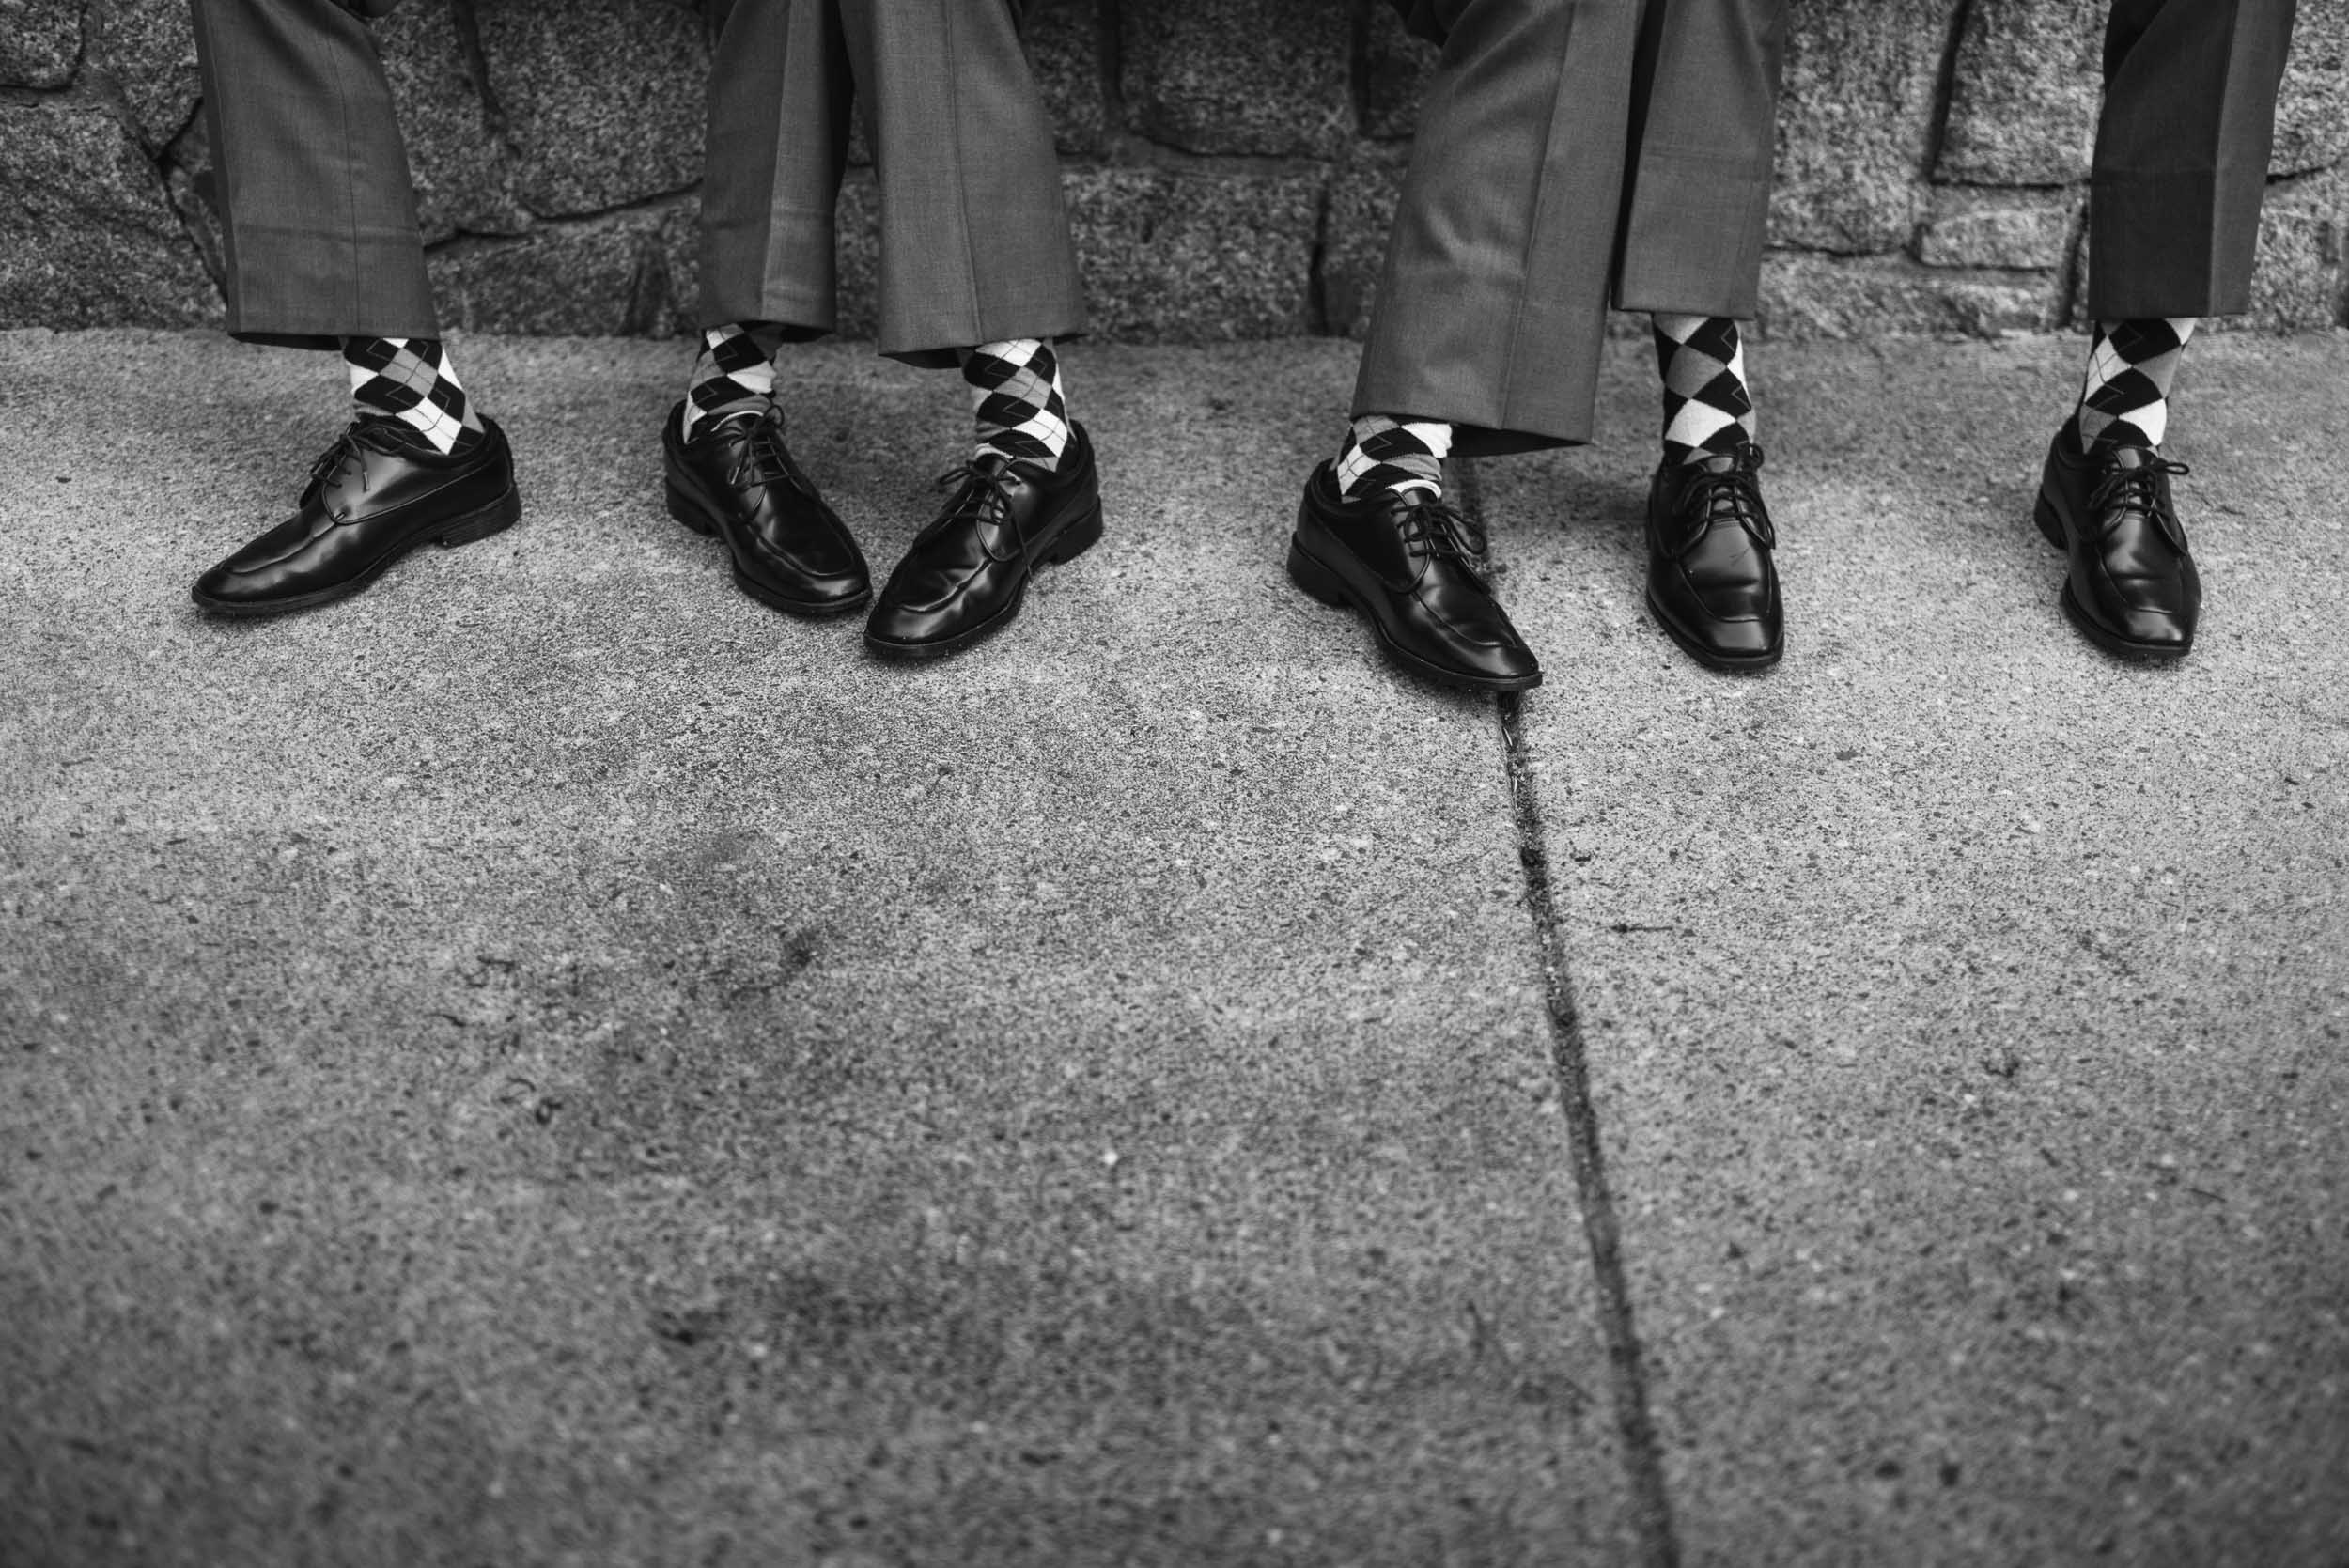 Groomsmen matching socks and shoes